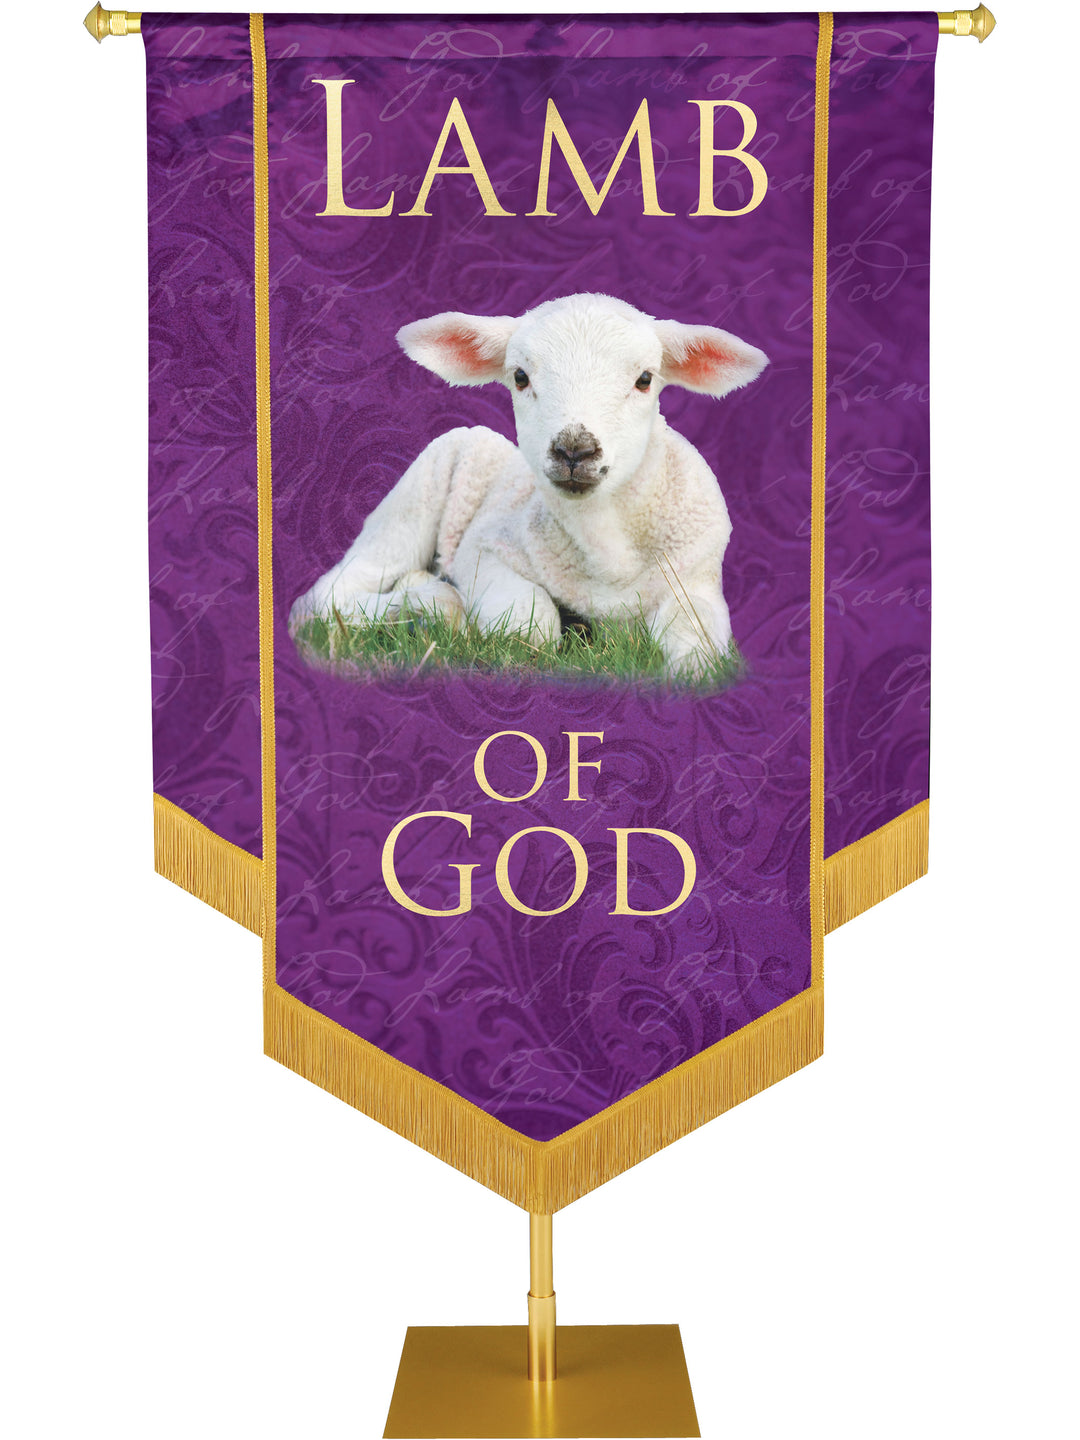 Names of Christ Lamb of God Embellished Banner - Handcrafted Banners - PraiseBanners